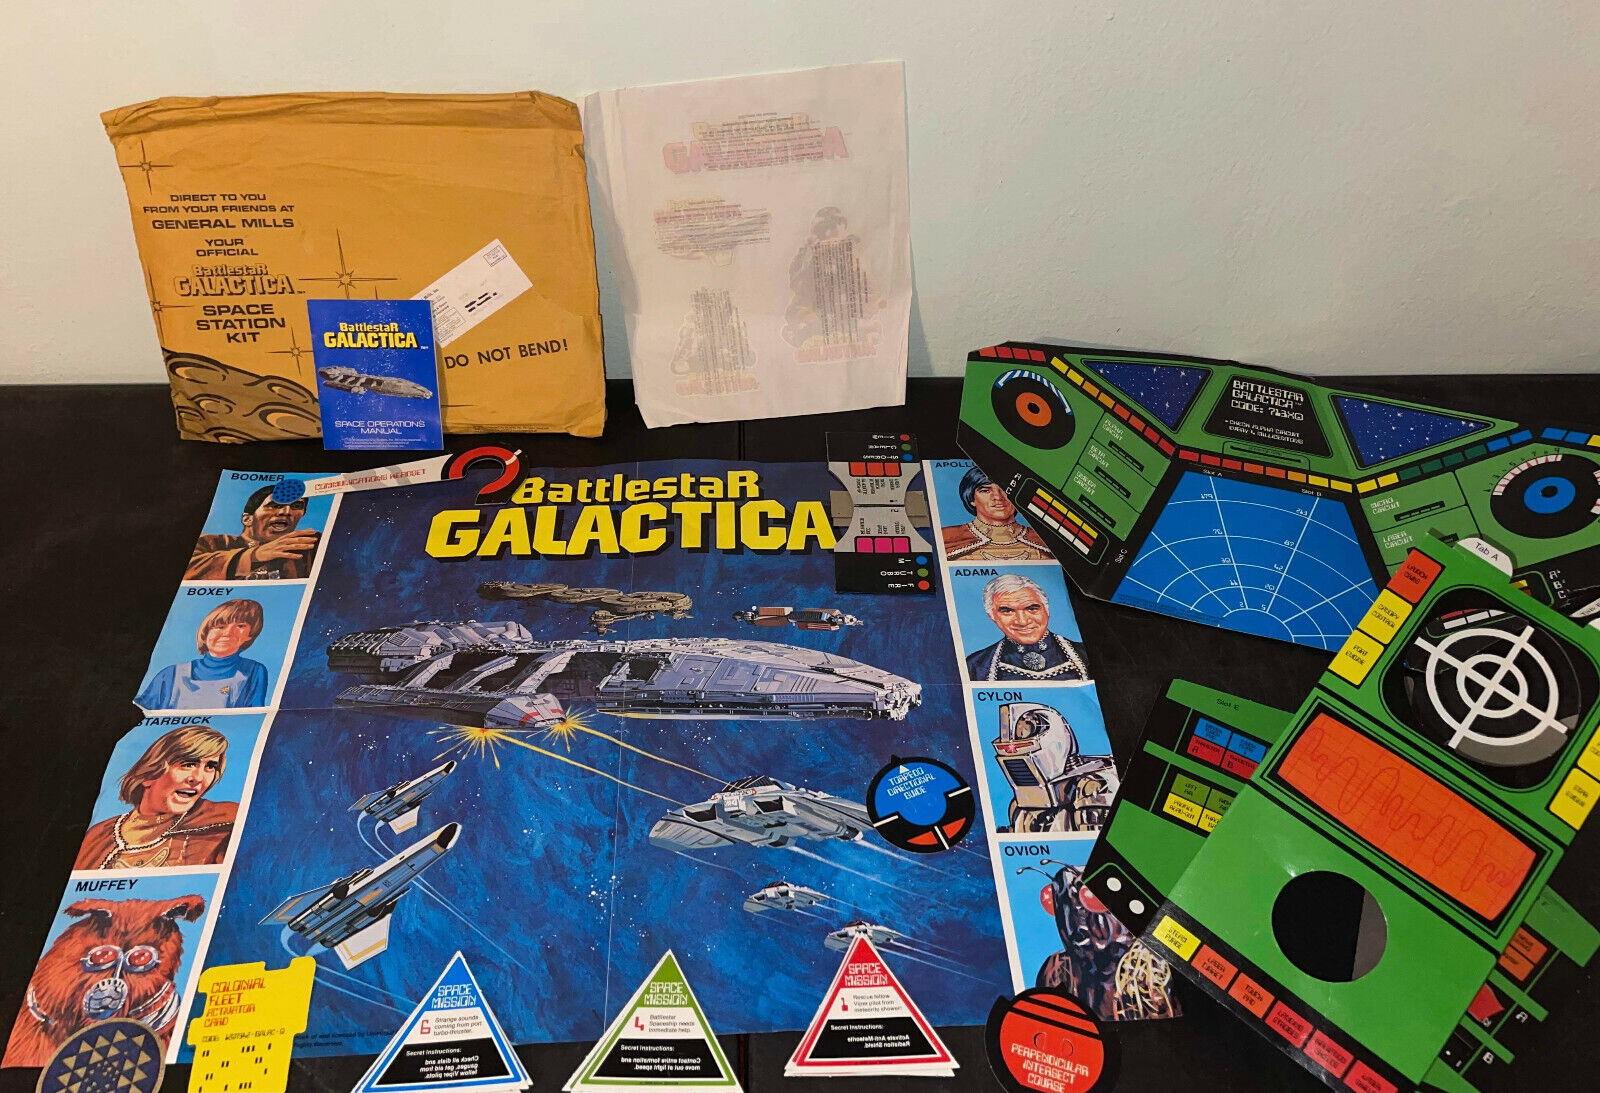 Battlestar Galactica 1978 General Mills Cereal Mail Away Space Kit Station